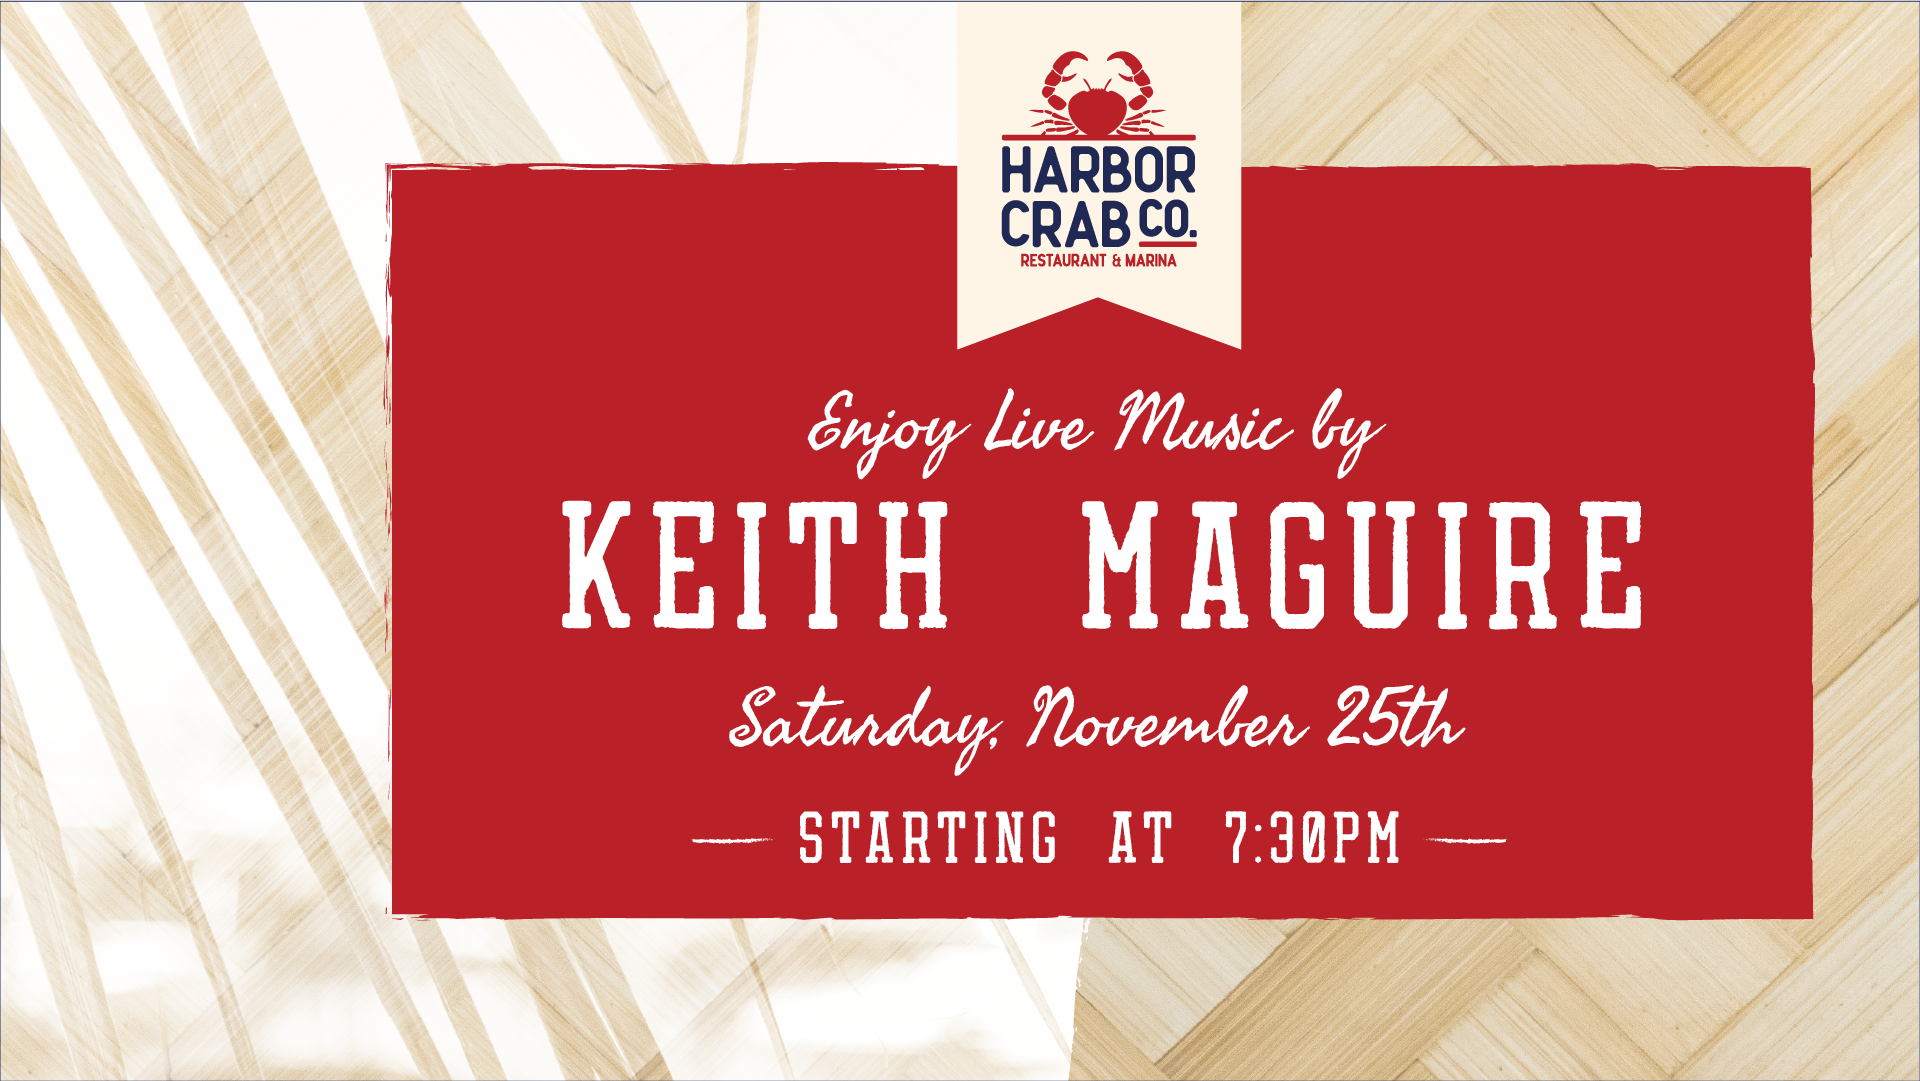 Live music with Keith Maguire on Saturday, Nov. 25th at 7:30pm